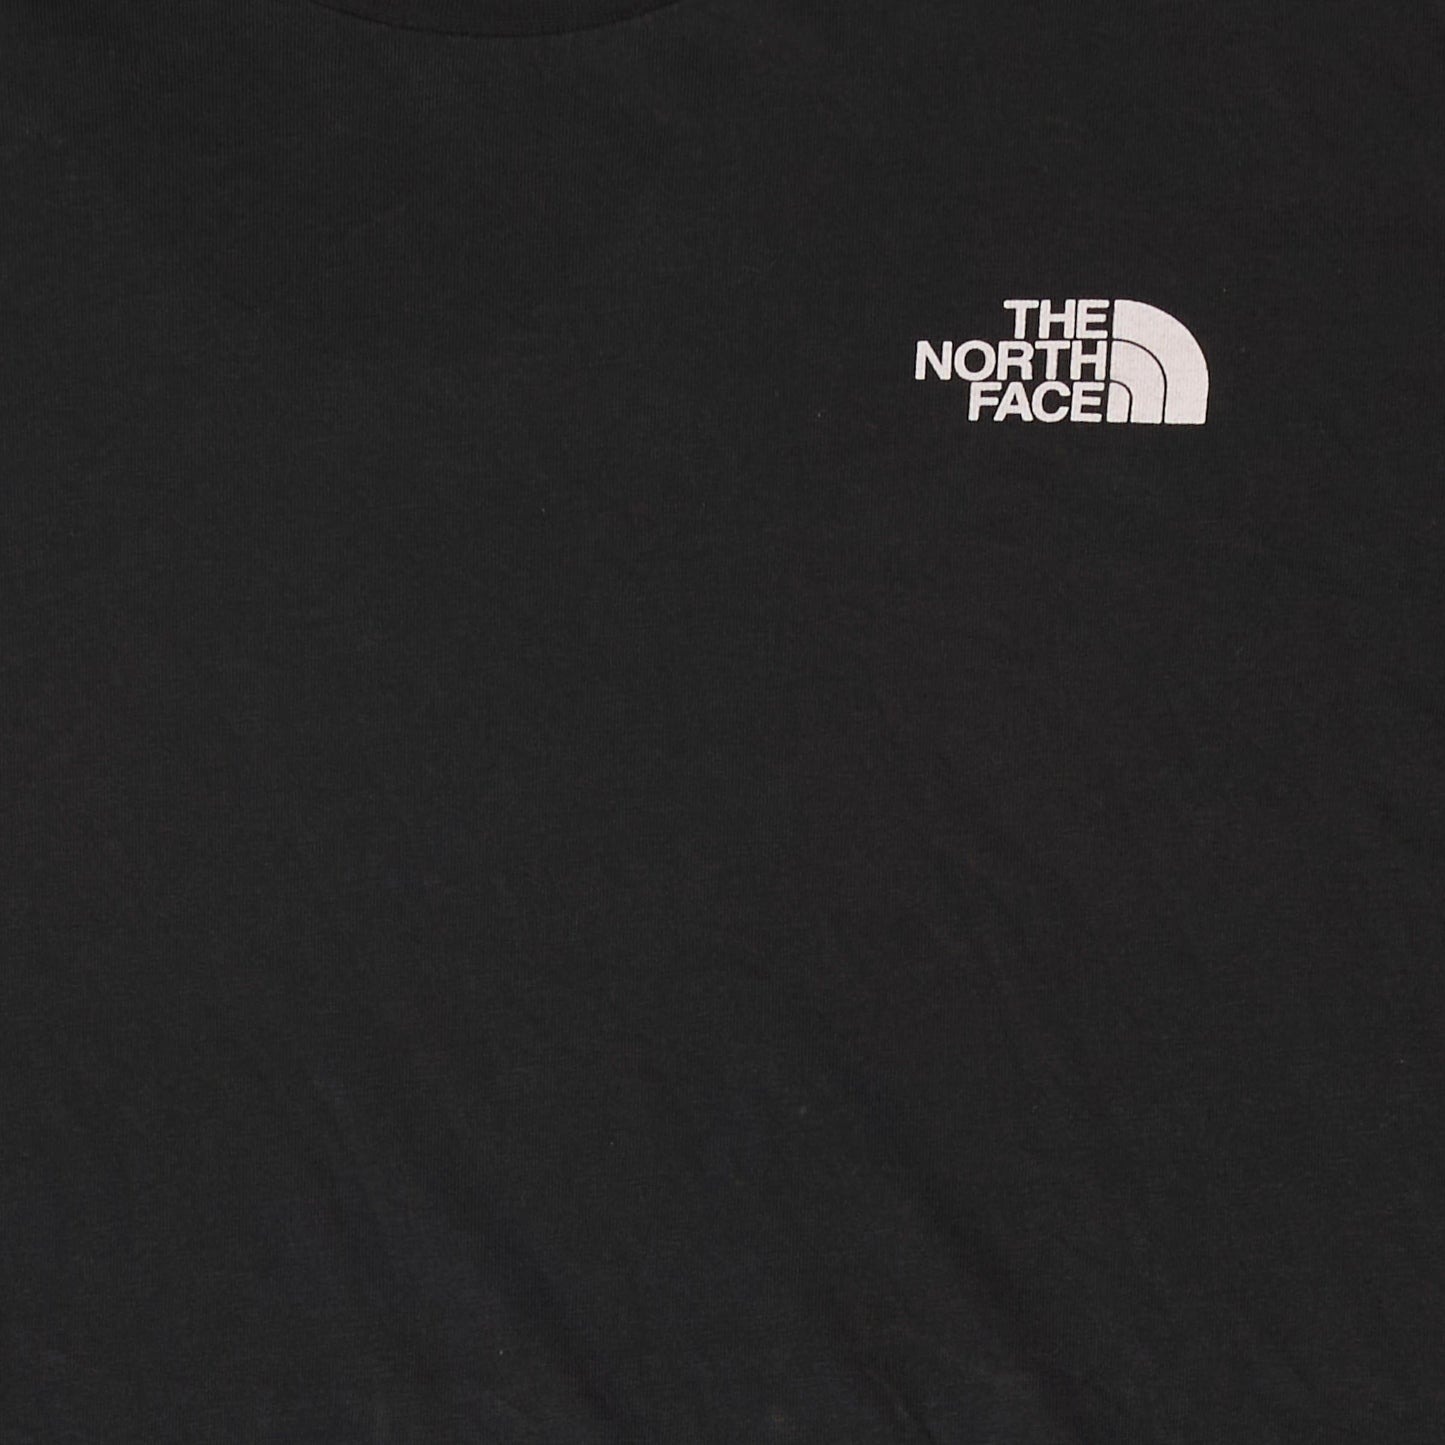 The North Face T-shirt - XL